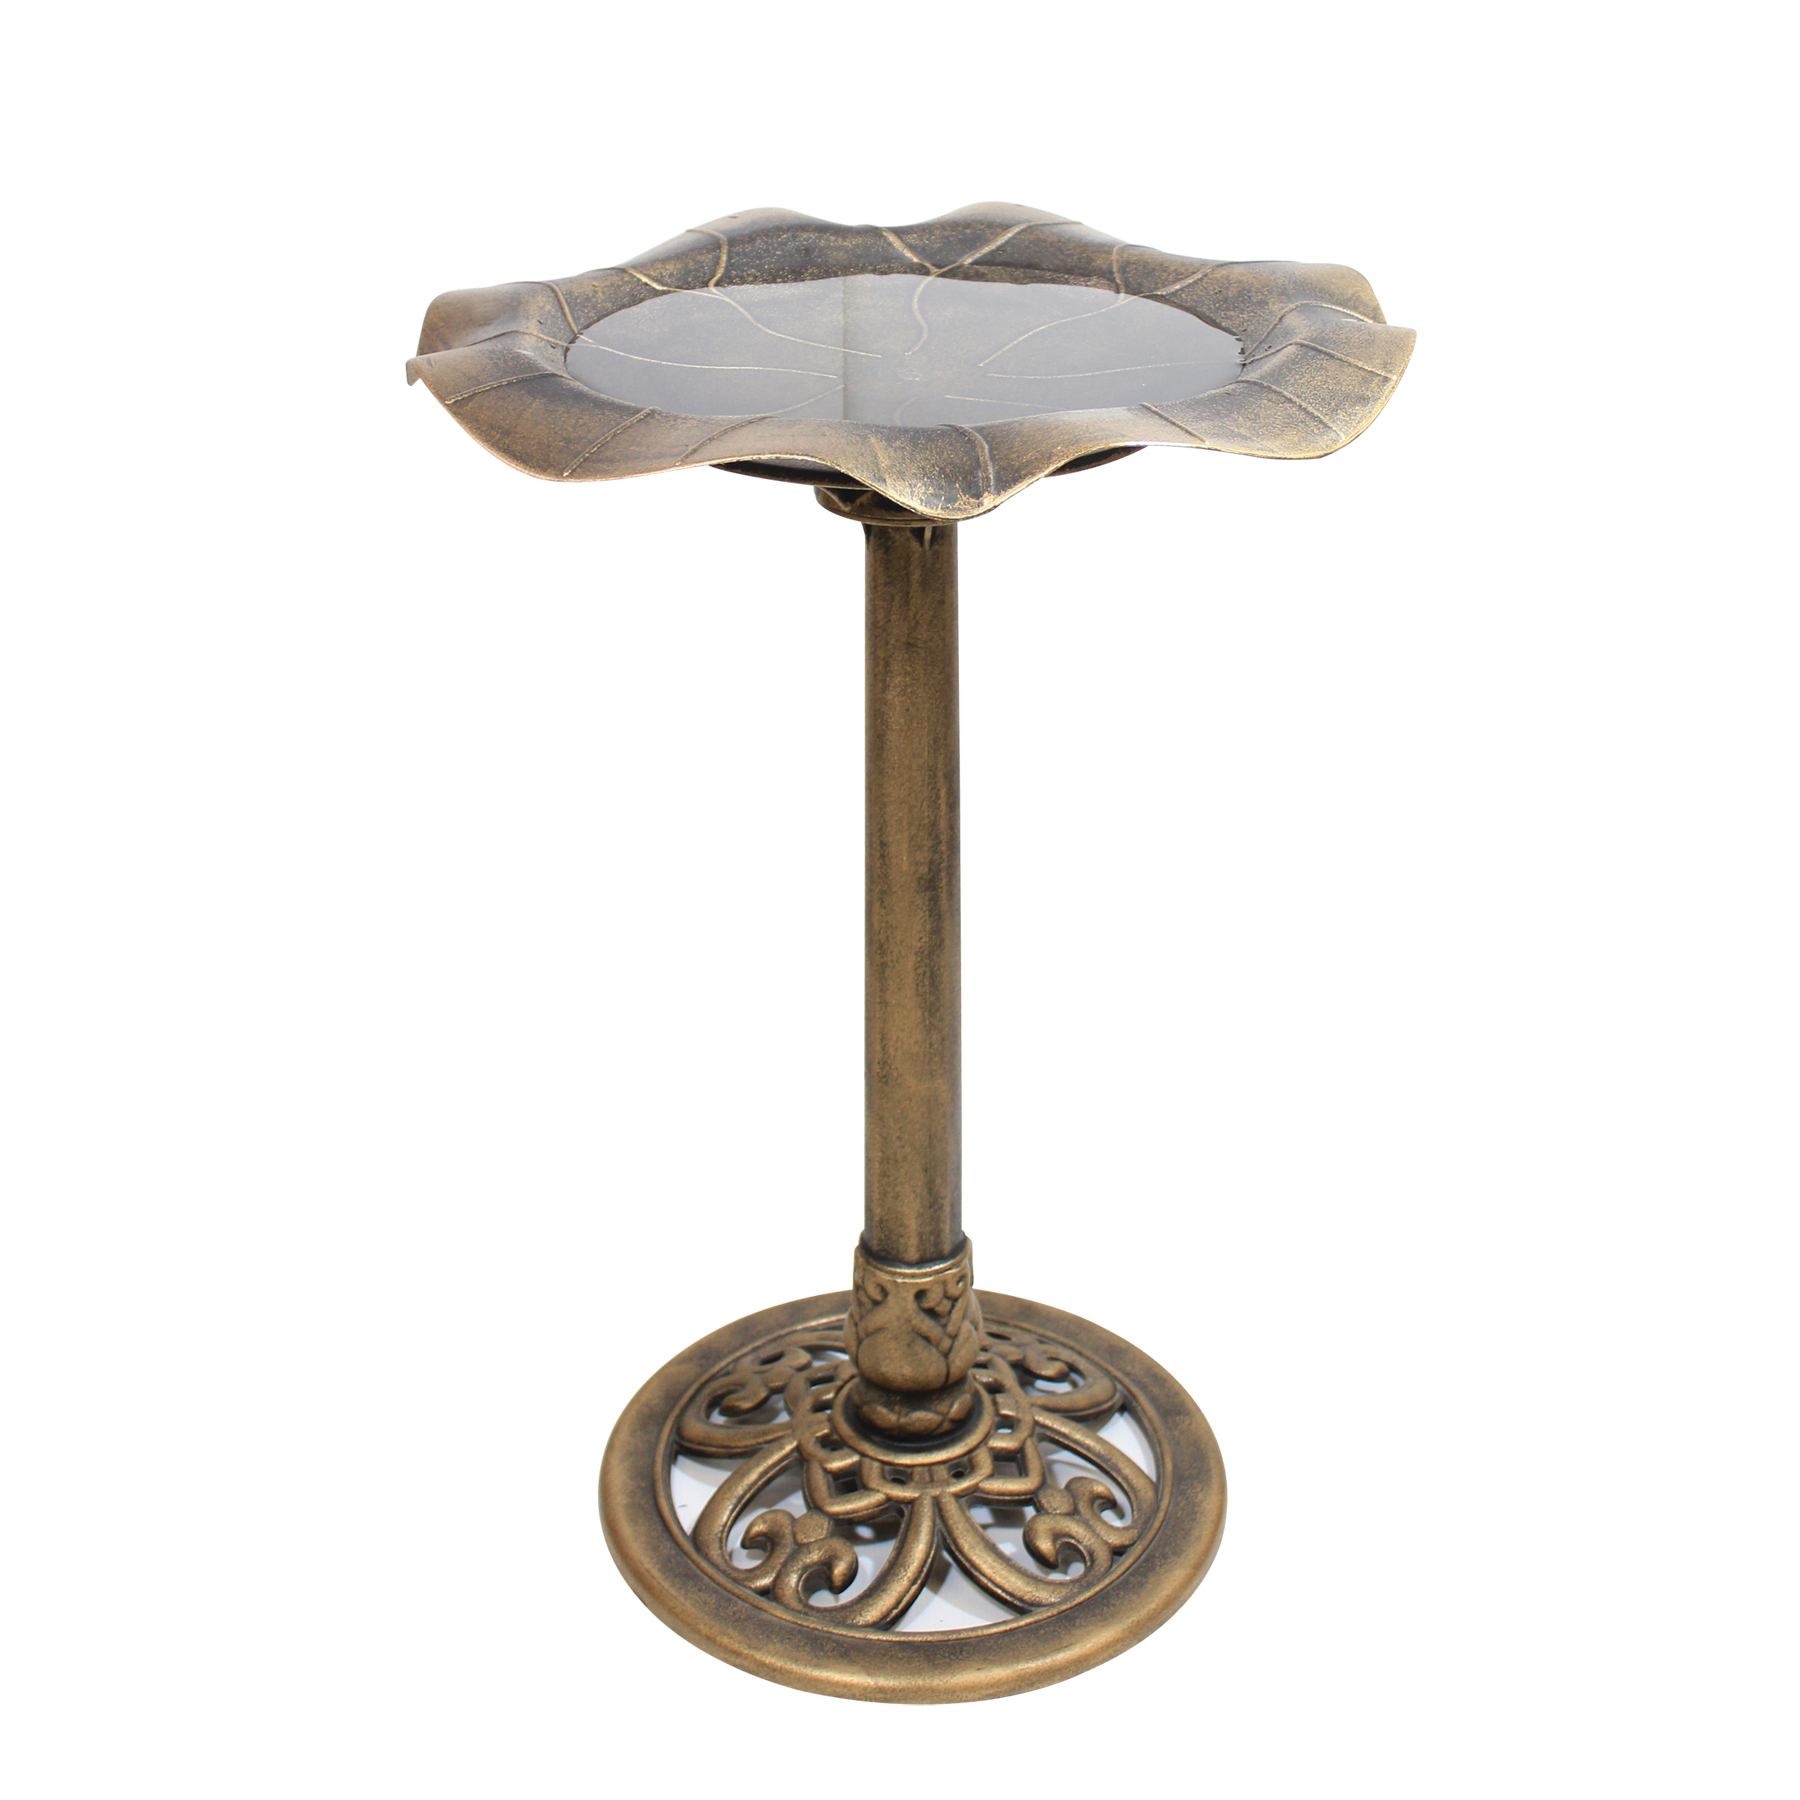 A tall bronze-coloured bird bath with water on top in the dish. 